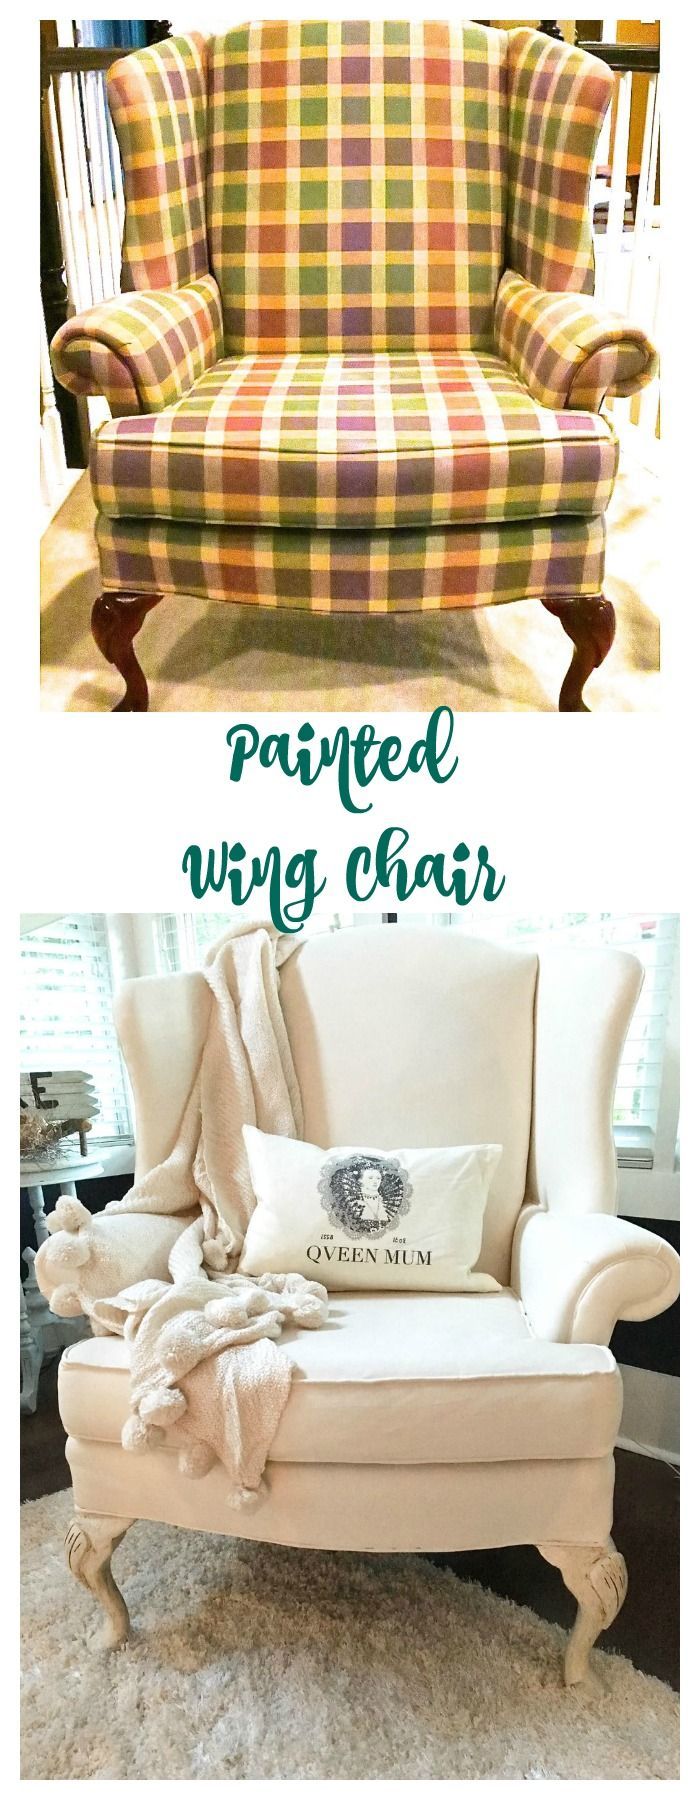 Painted Wing Chair...it worked! - 2 Bees in a Pod - Painted Wing Chair...it worked! - 2 Bees in a Pod -   19 diy Pillows chair ideas